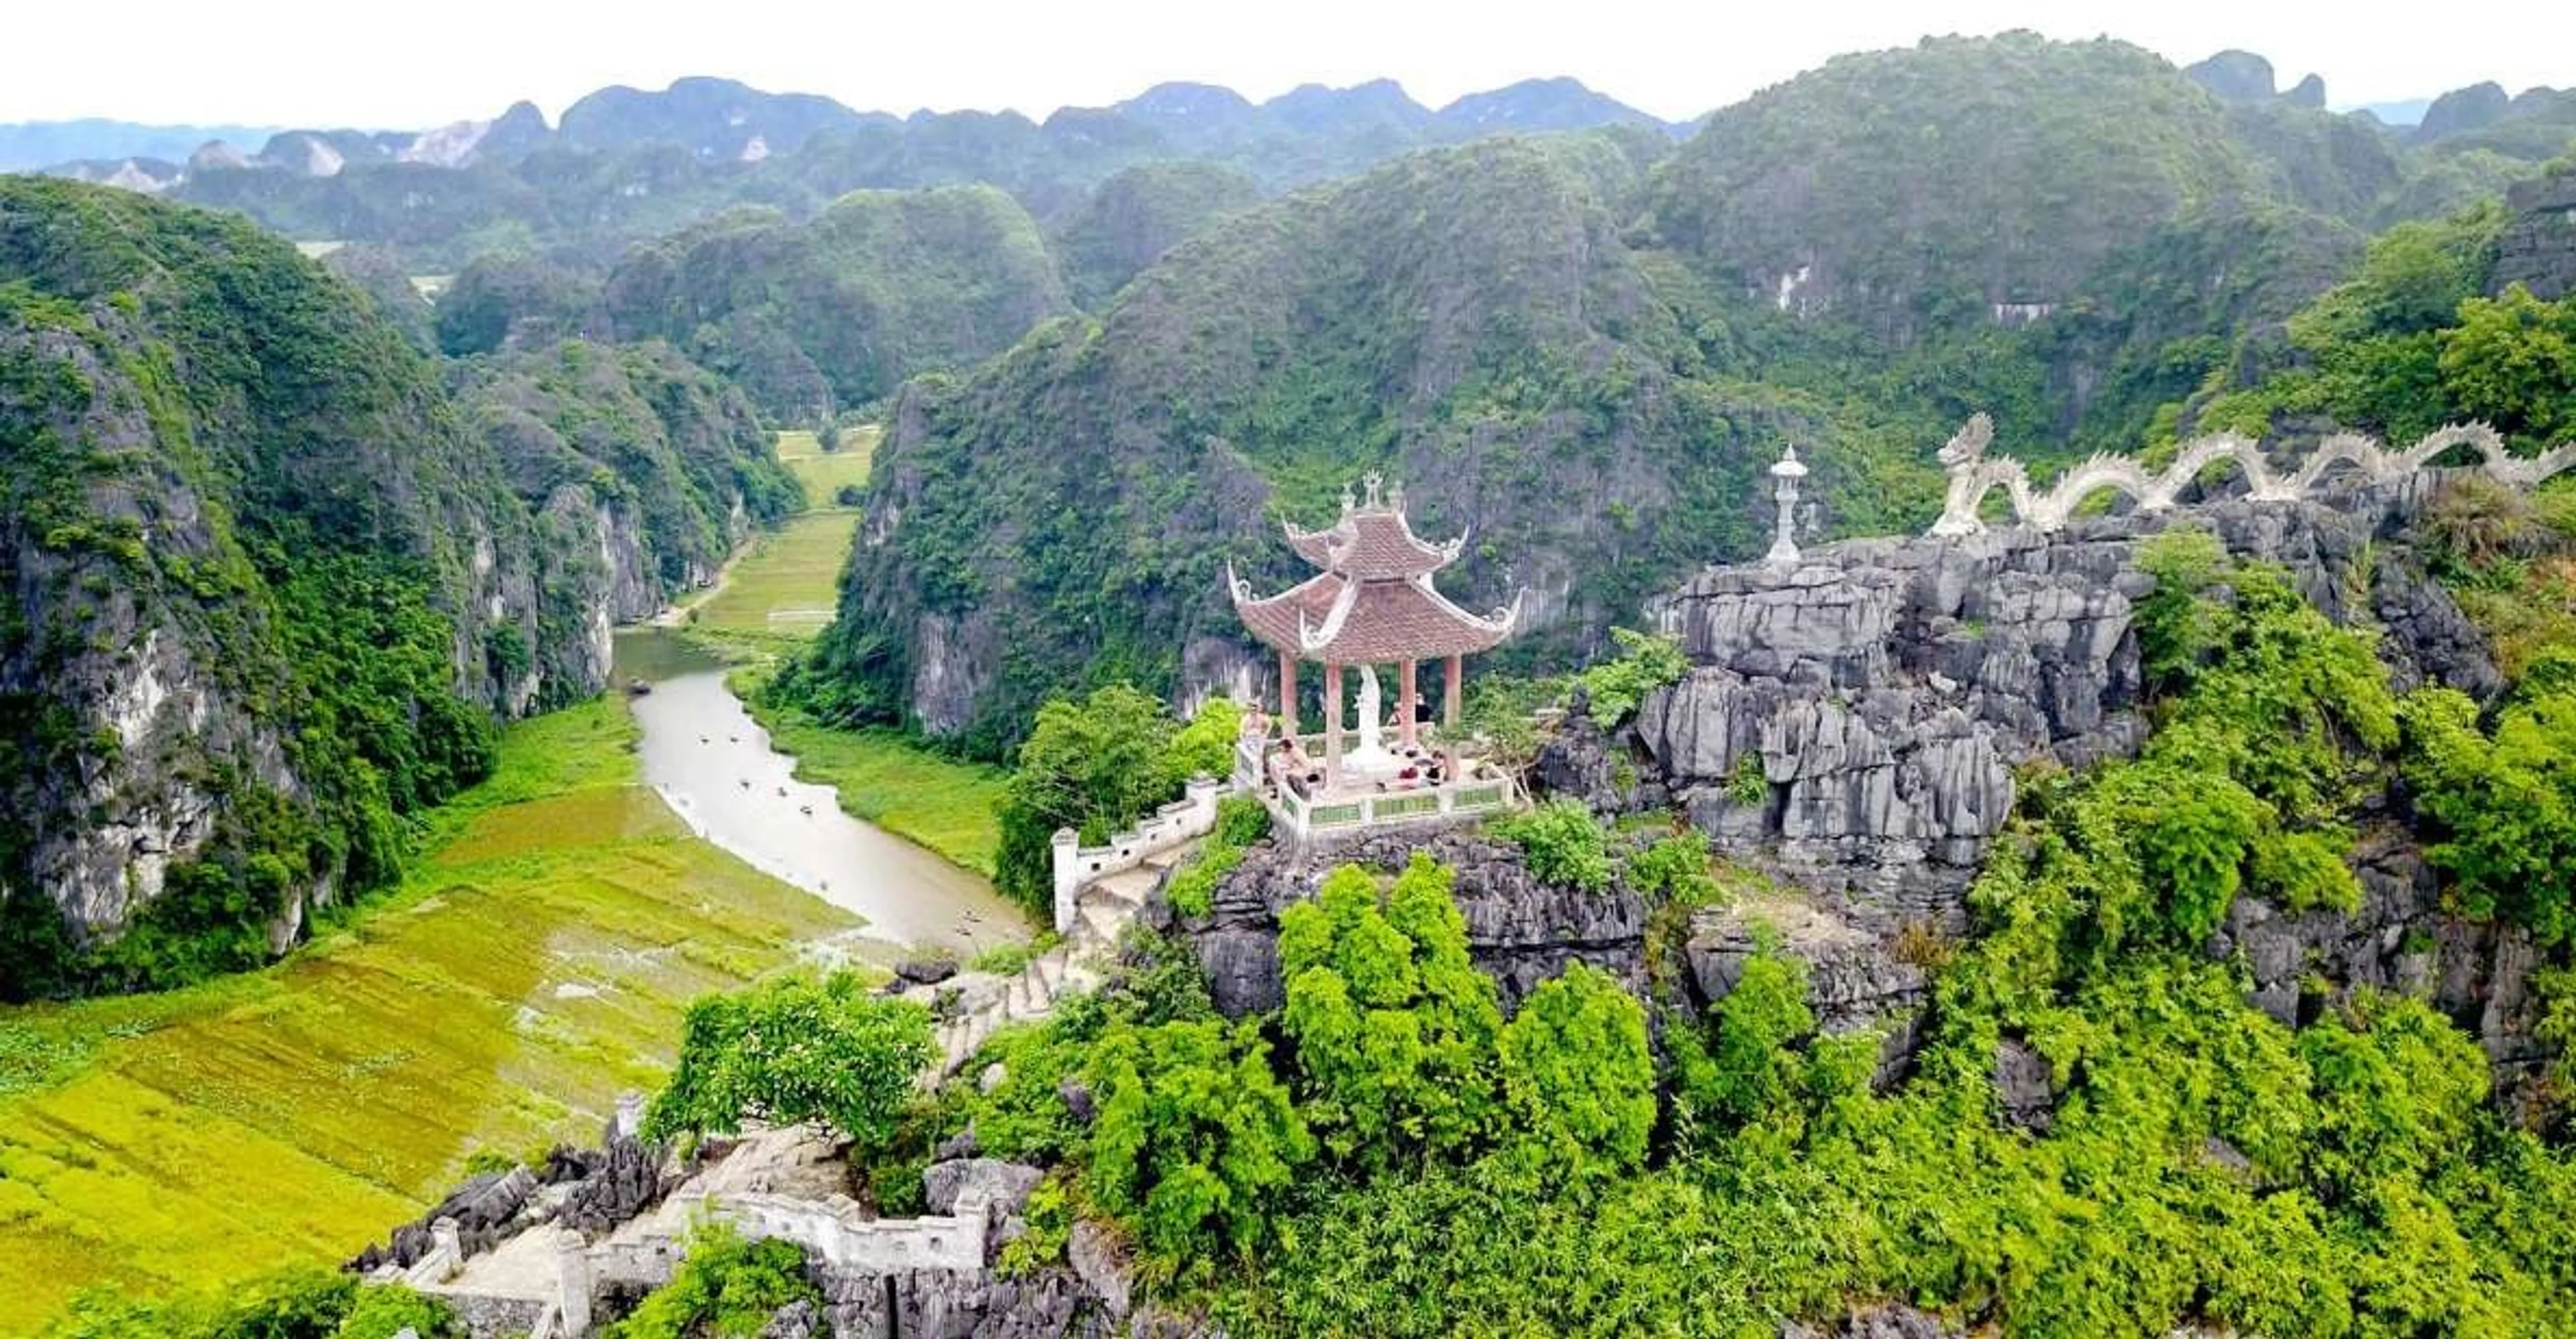 Journey to Explore Ninh Binh Vietnam's Tourism Paradise in the Heart of Majestic Nature